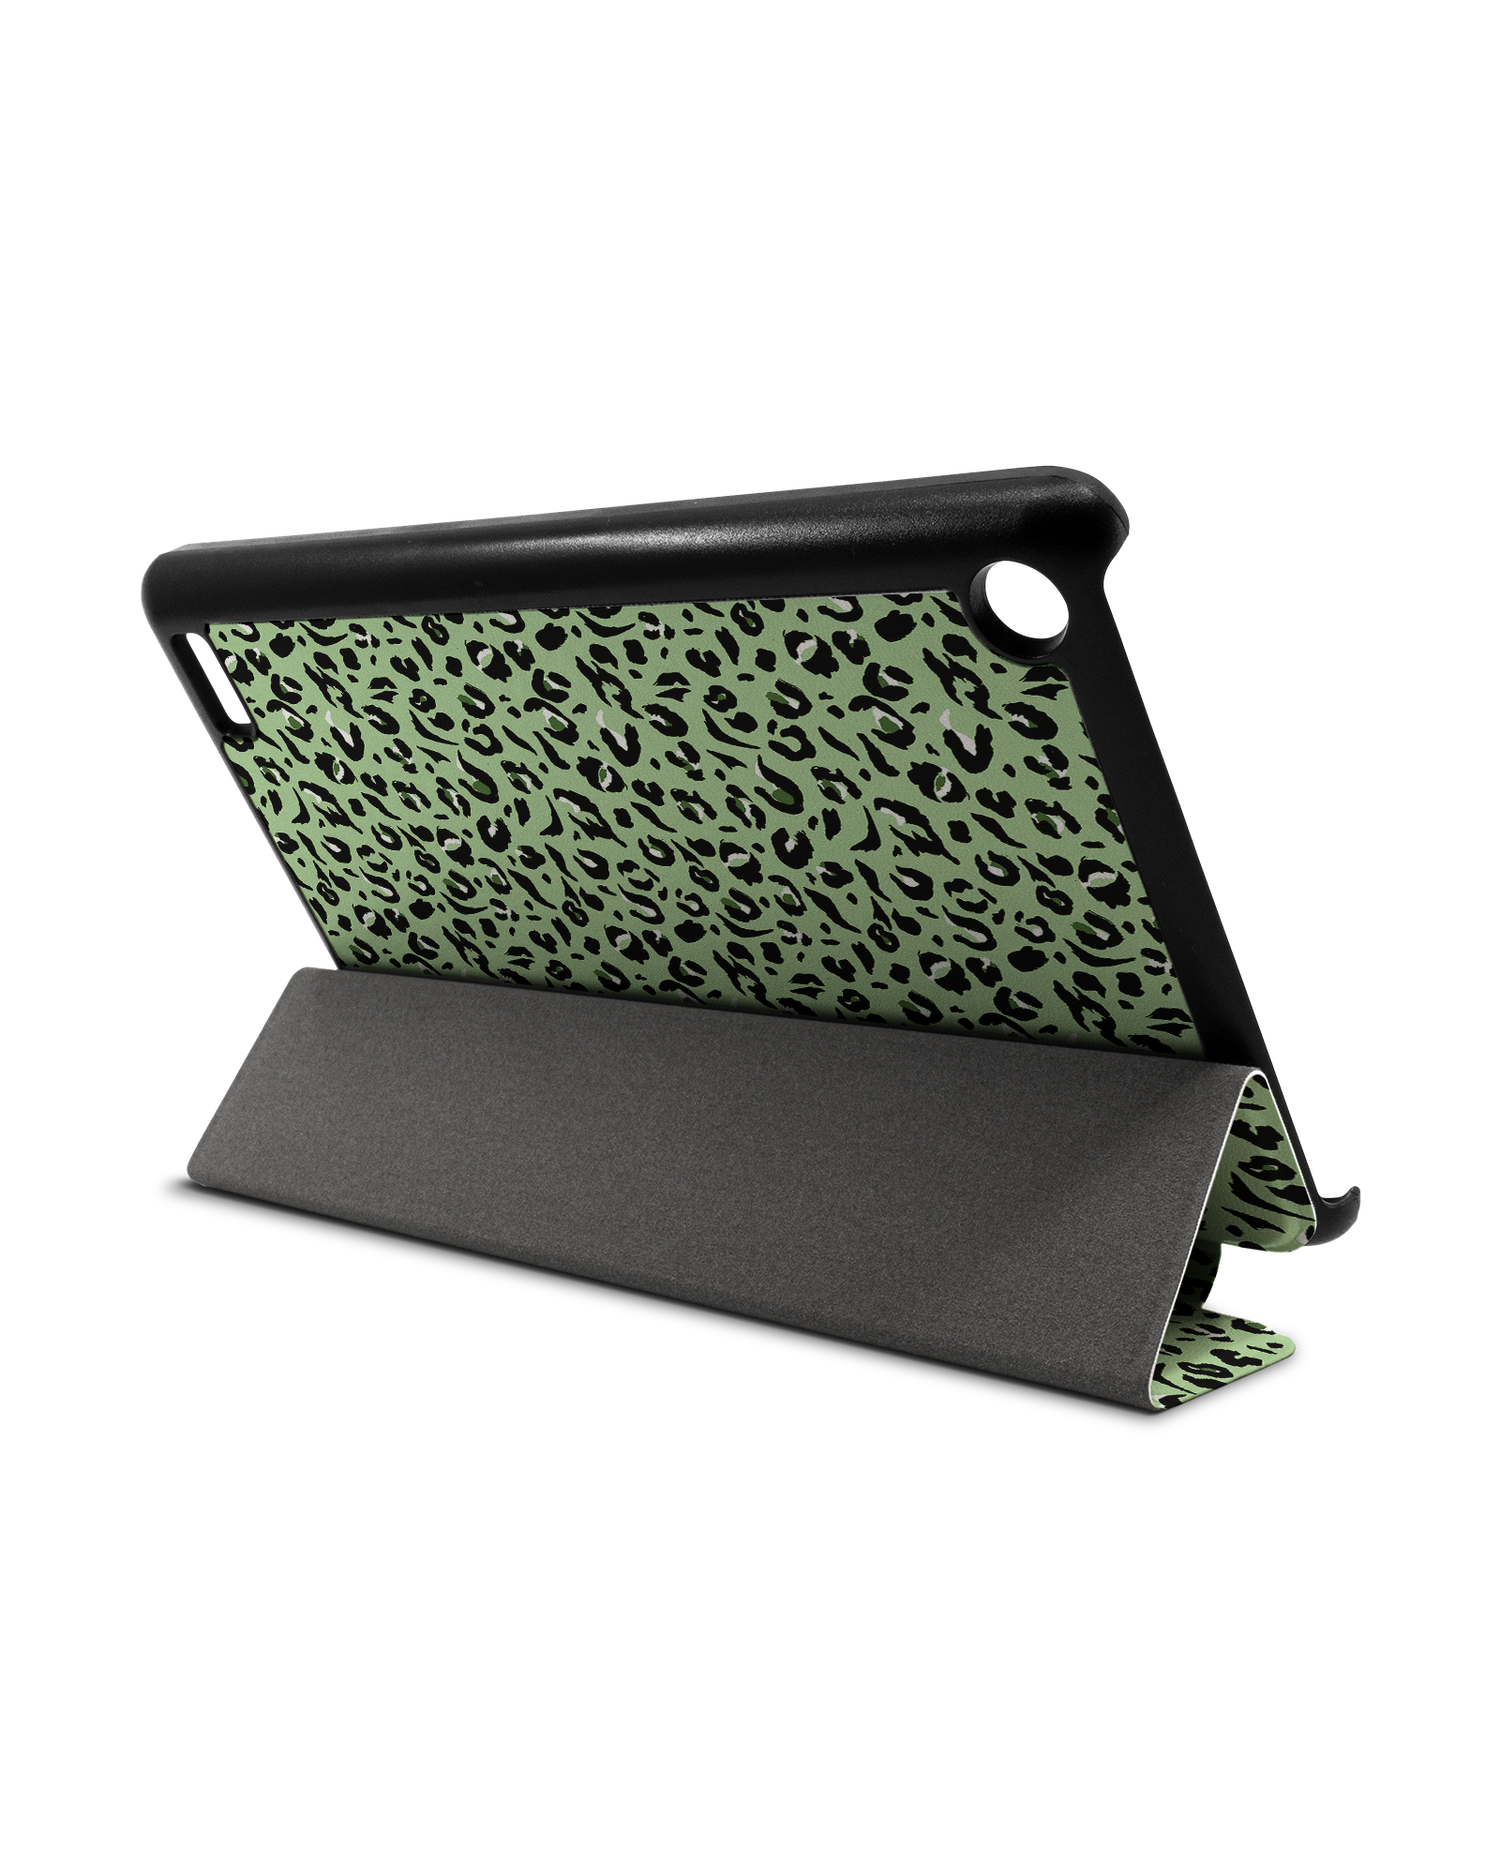 Mint Leopard Tablet Smart Case for Amazon Fire 7: Used as Stand